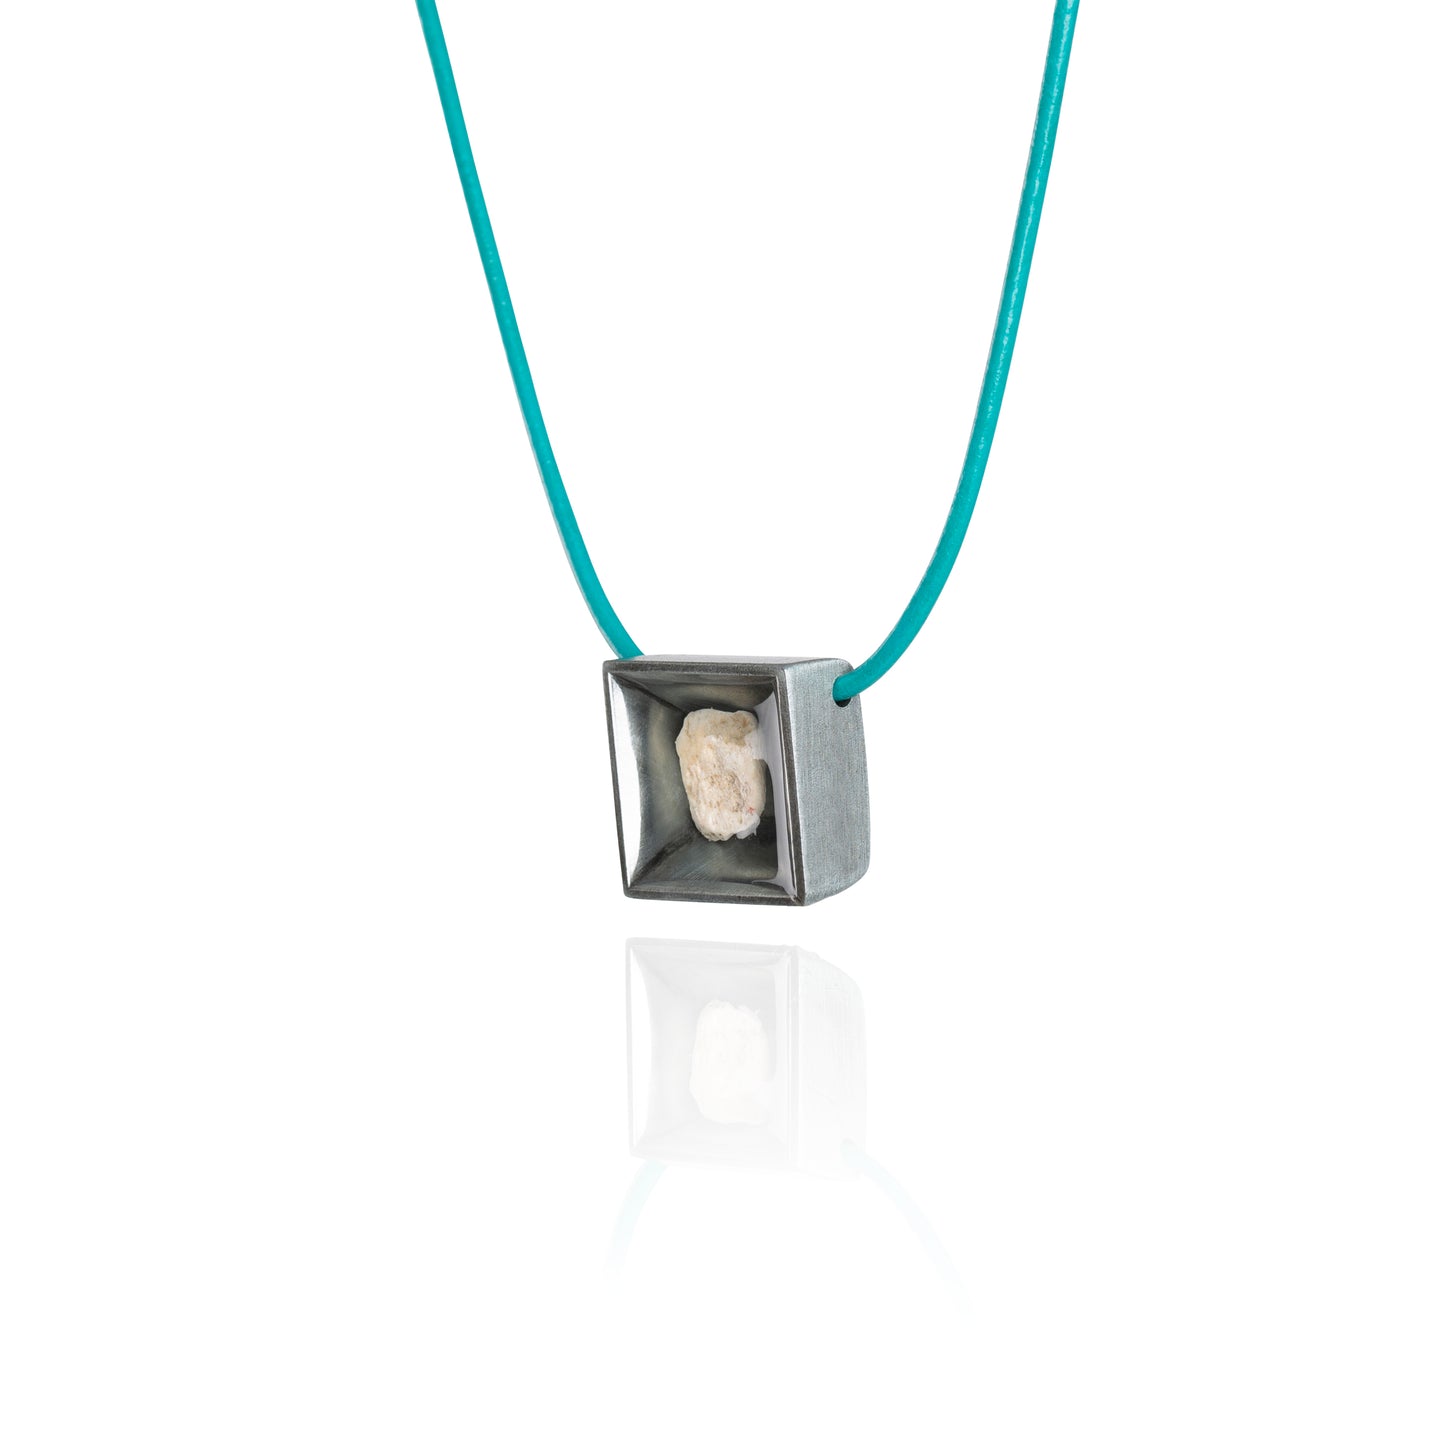 A side view of a small natural tan stone sitting in the middle of a square shaped metal pendant in a dark silver color. The pendant is hanging on a turquoise leather necklace.